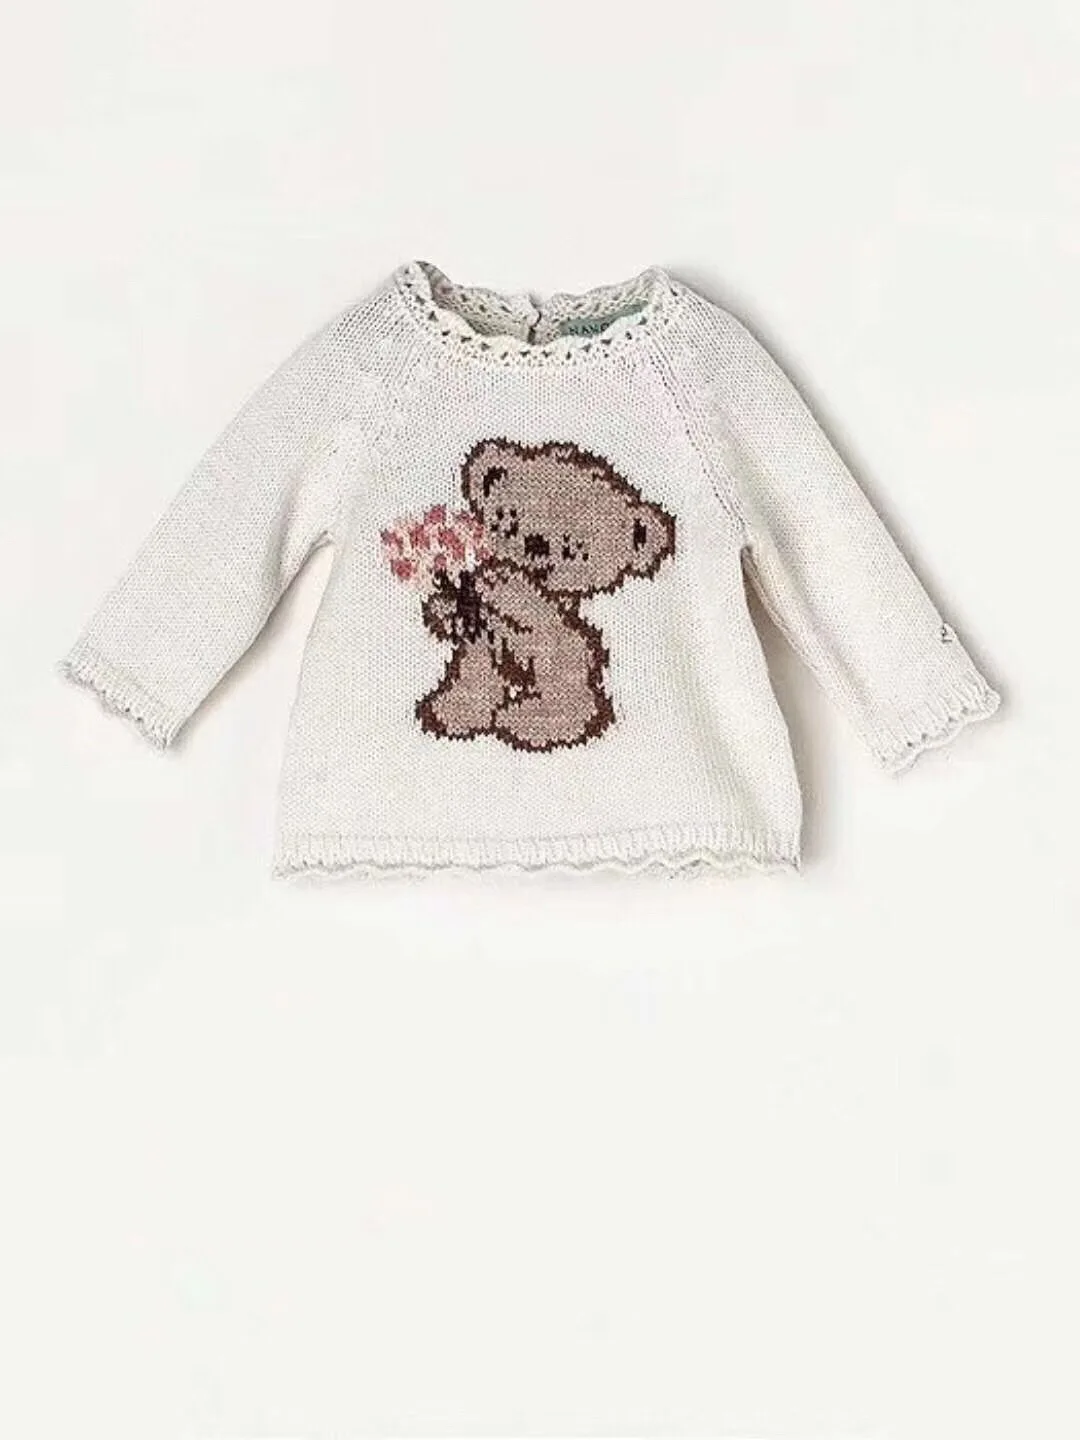 

Single Mark Children Knitting Unlined Upper Garment Pullover Male Girl Pure Cotton Jacquard Weave Sweater Jacket 3-8 Year Code